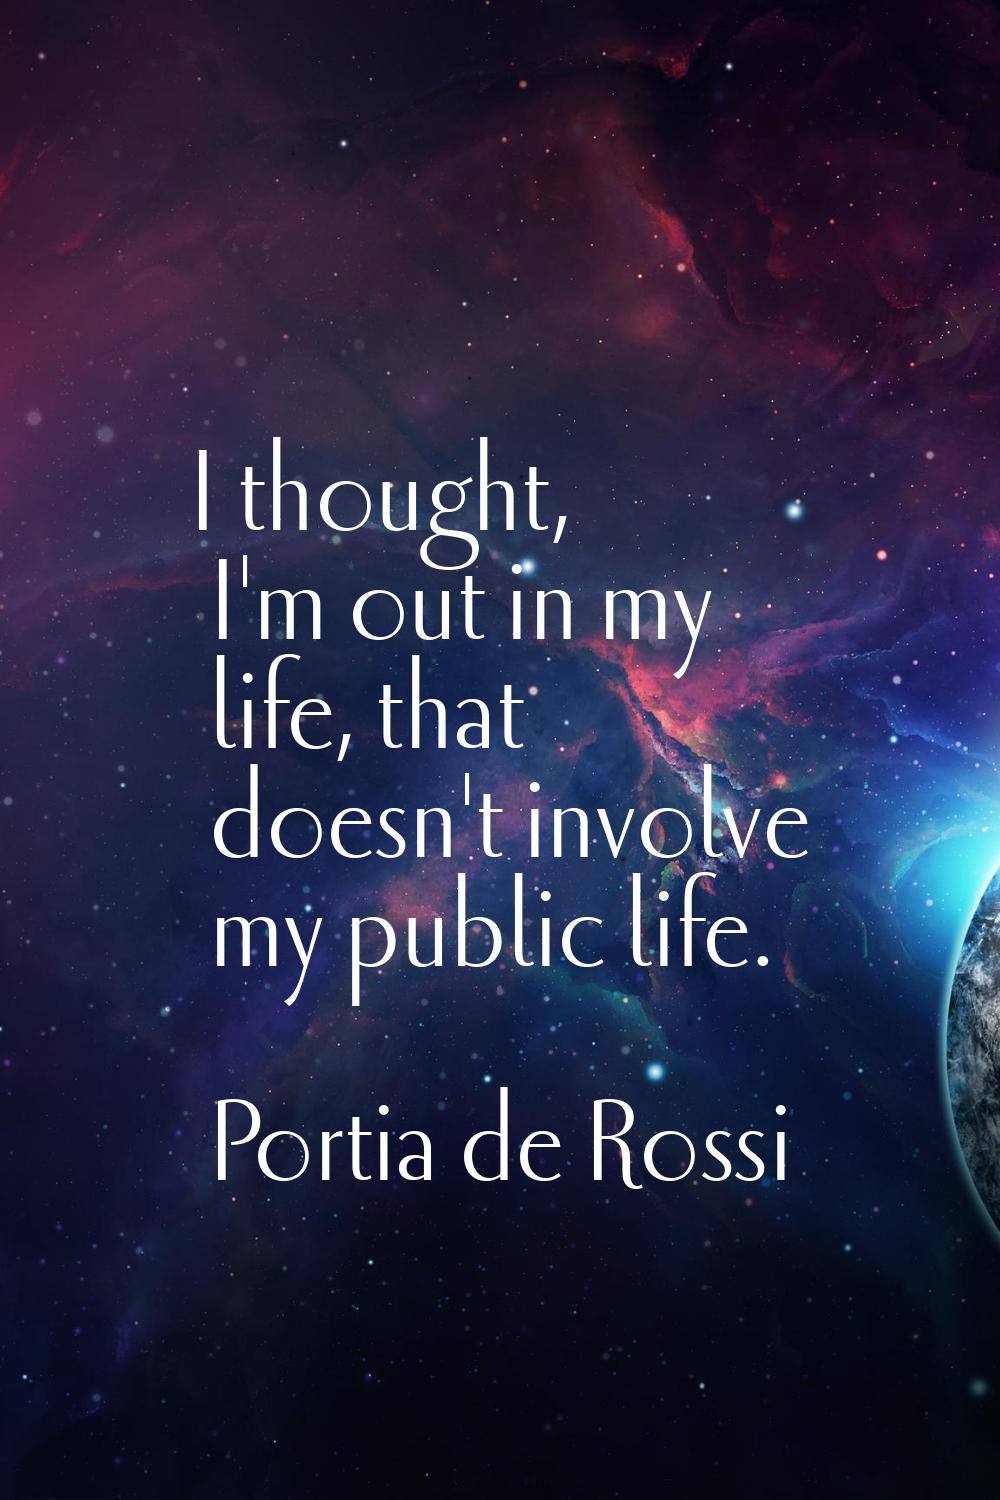 I thought, I'm out in my life, that doesn't involve my public life.